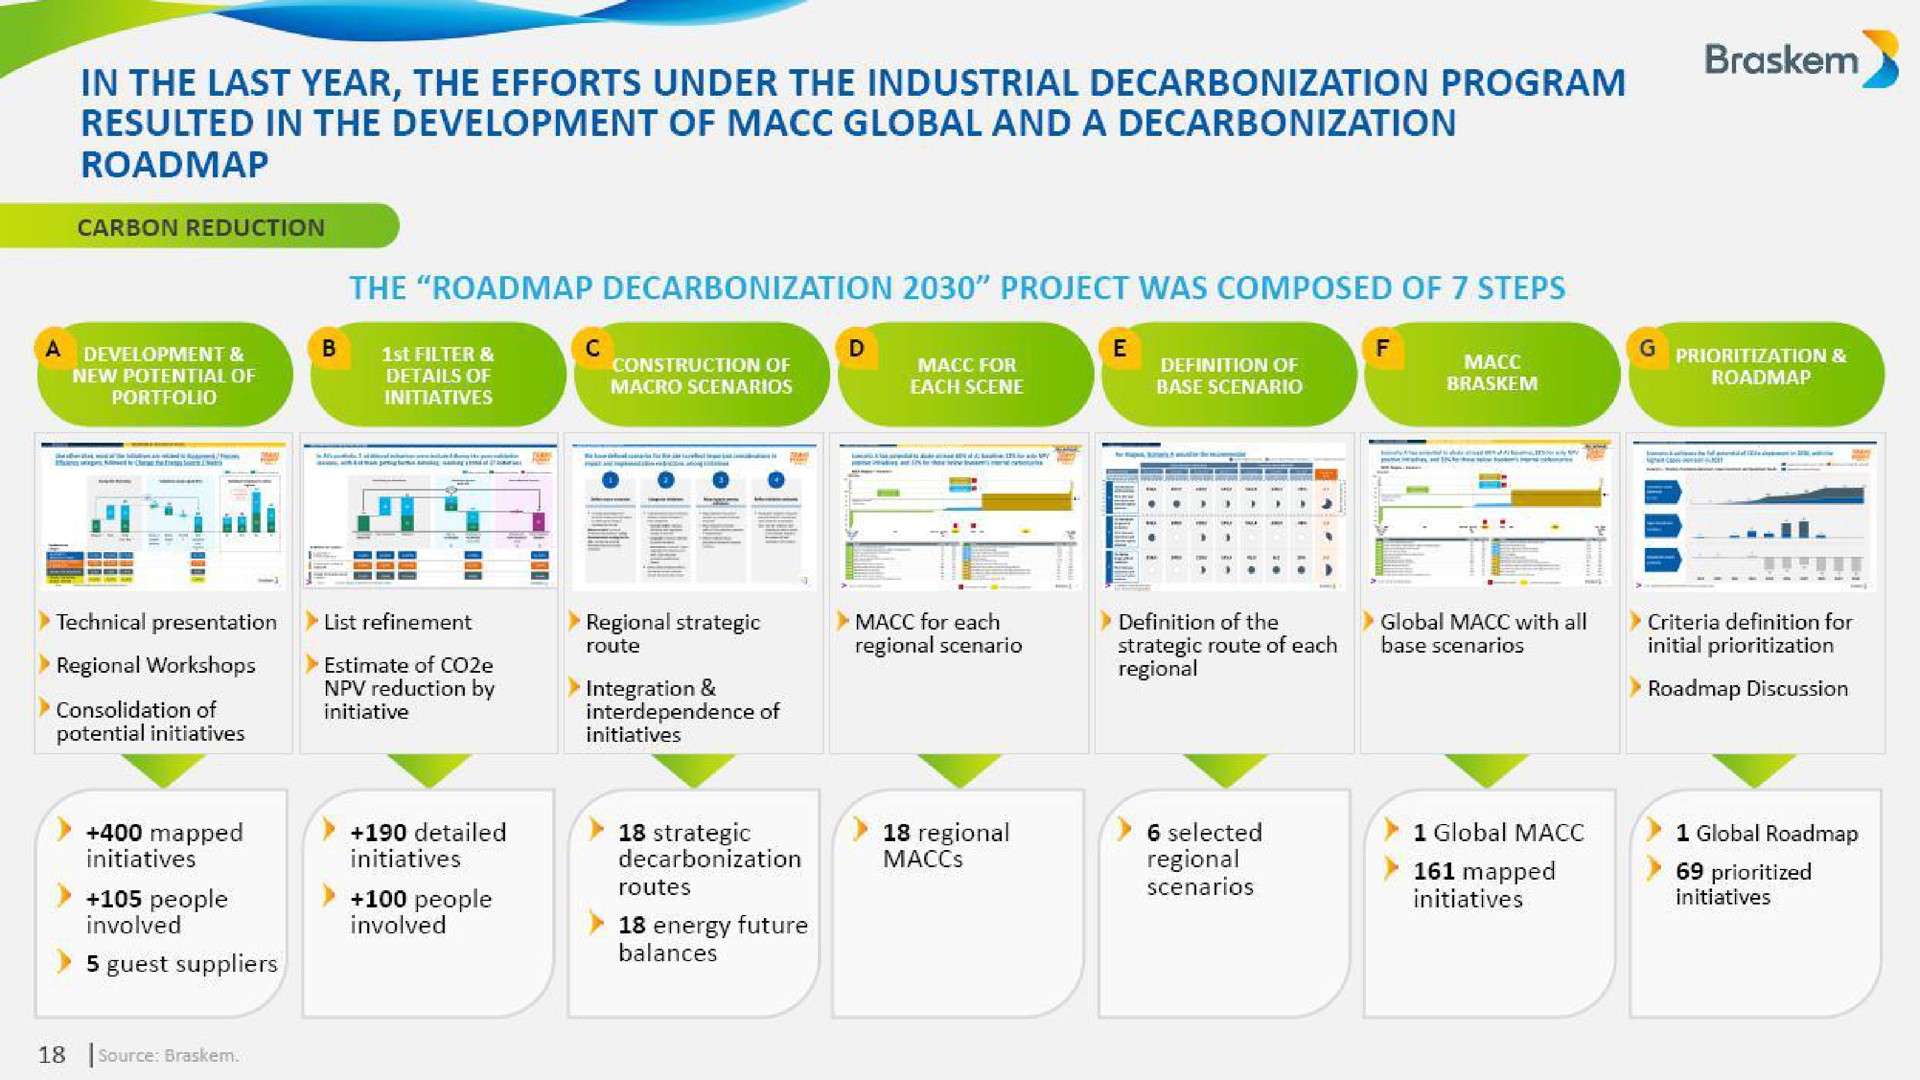 in the last year the efforts under the industrial decarbonization program resulted in the development of global and a decarbonization | Braskem